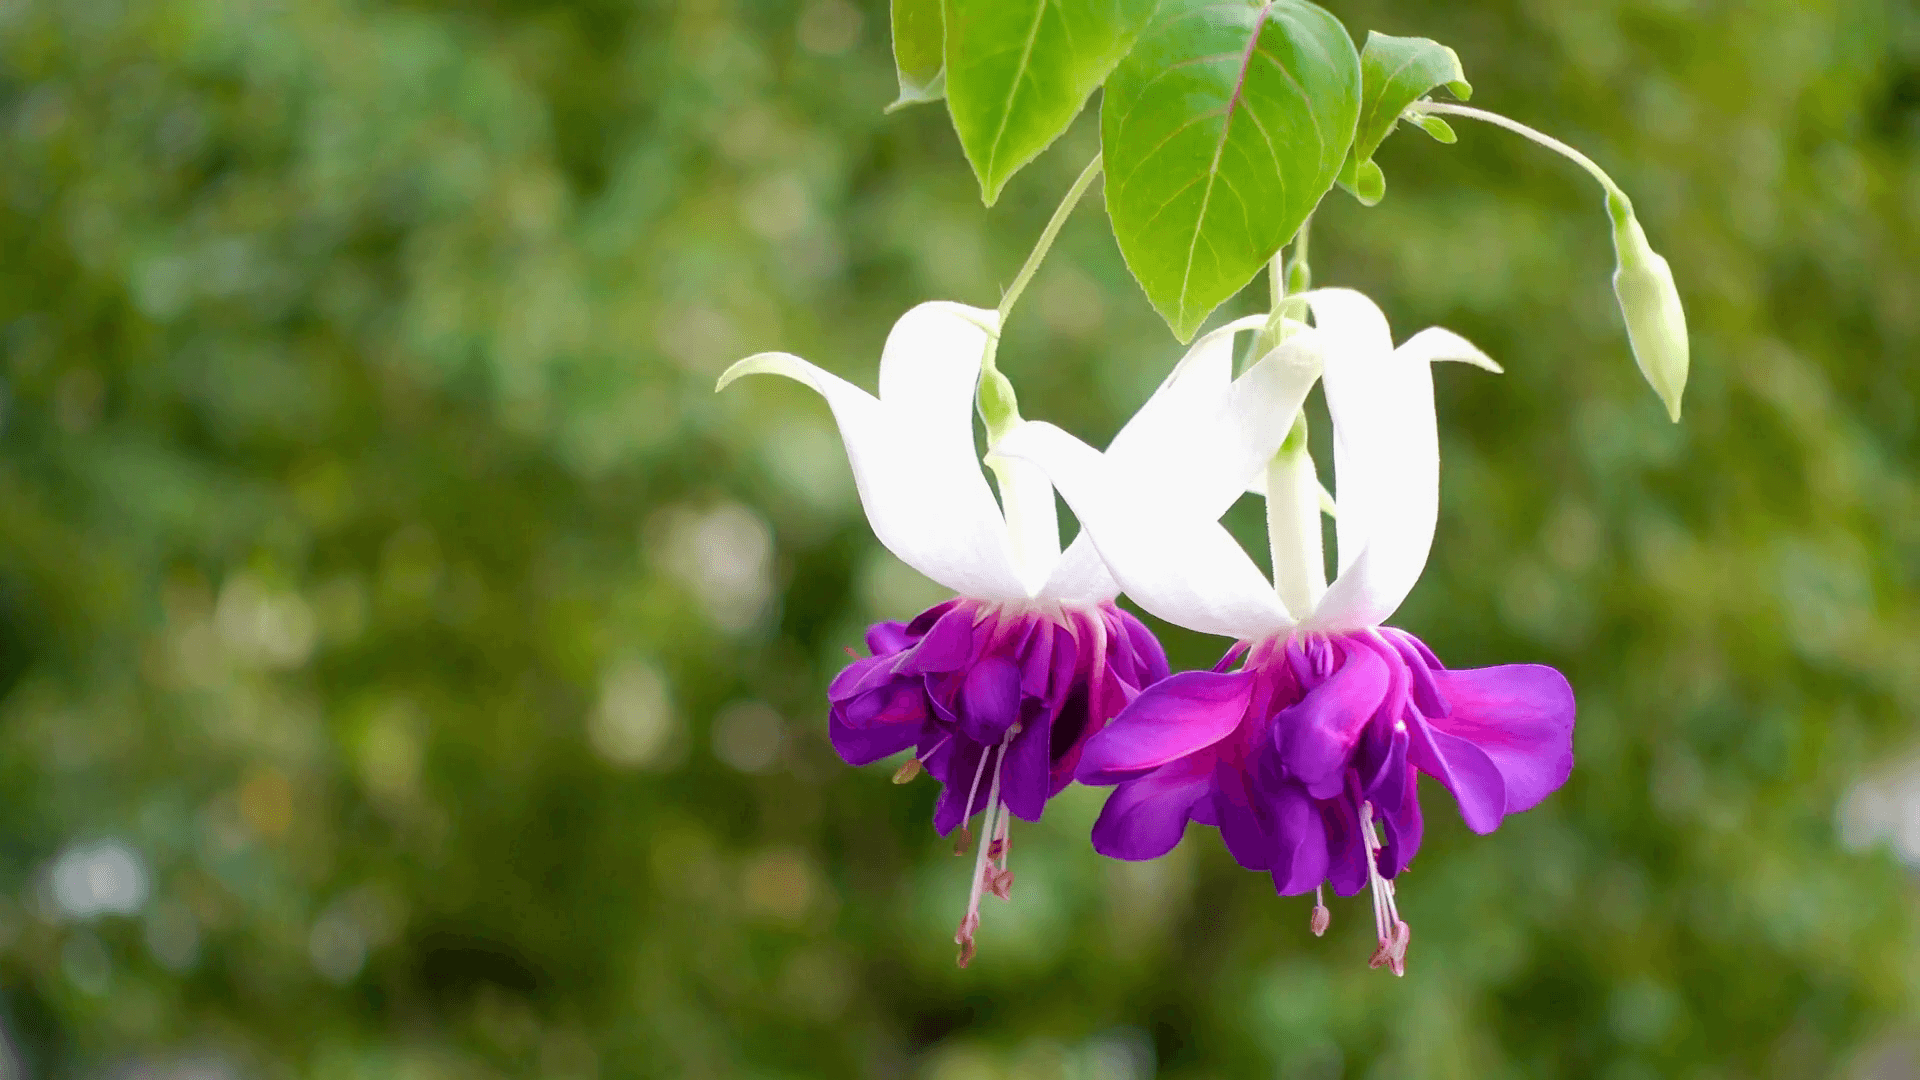 blooming lilac and white fuchsia flower on nature background Stock